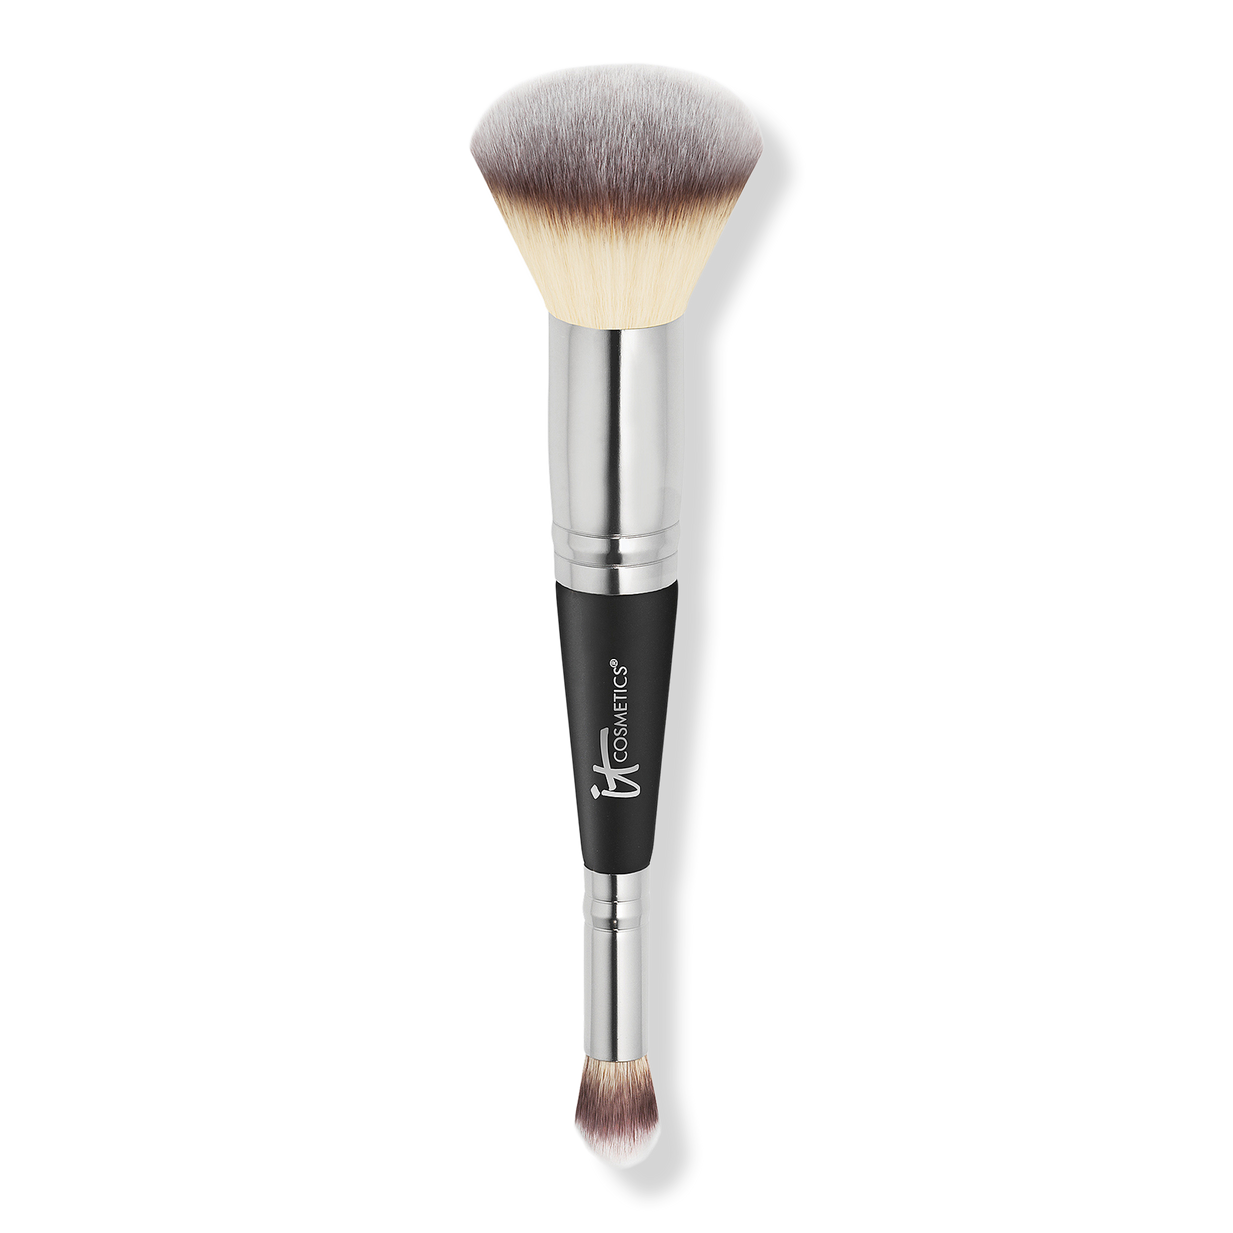 IT Cosmetics Special Edition Holiday 4-Piece Luxe Brush Set w/ Bag 